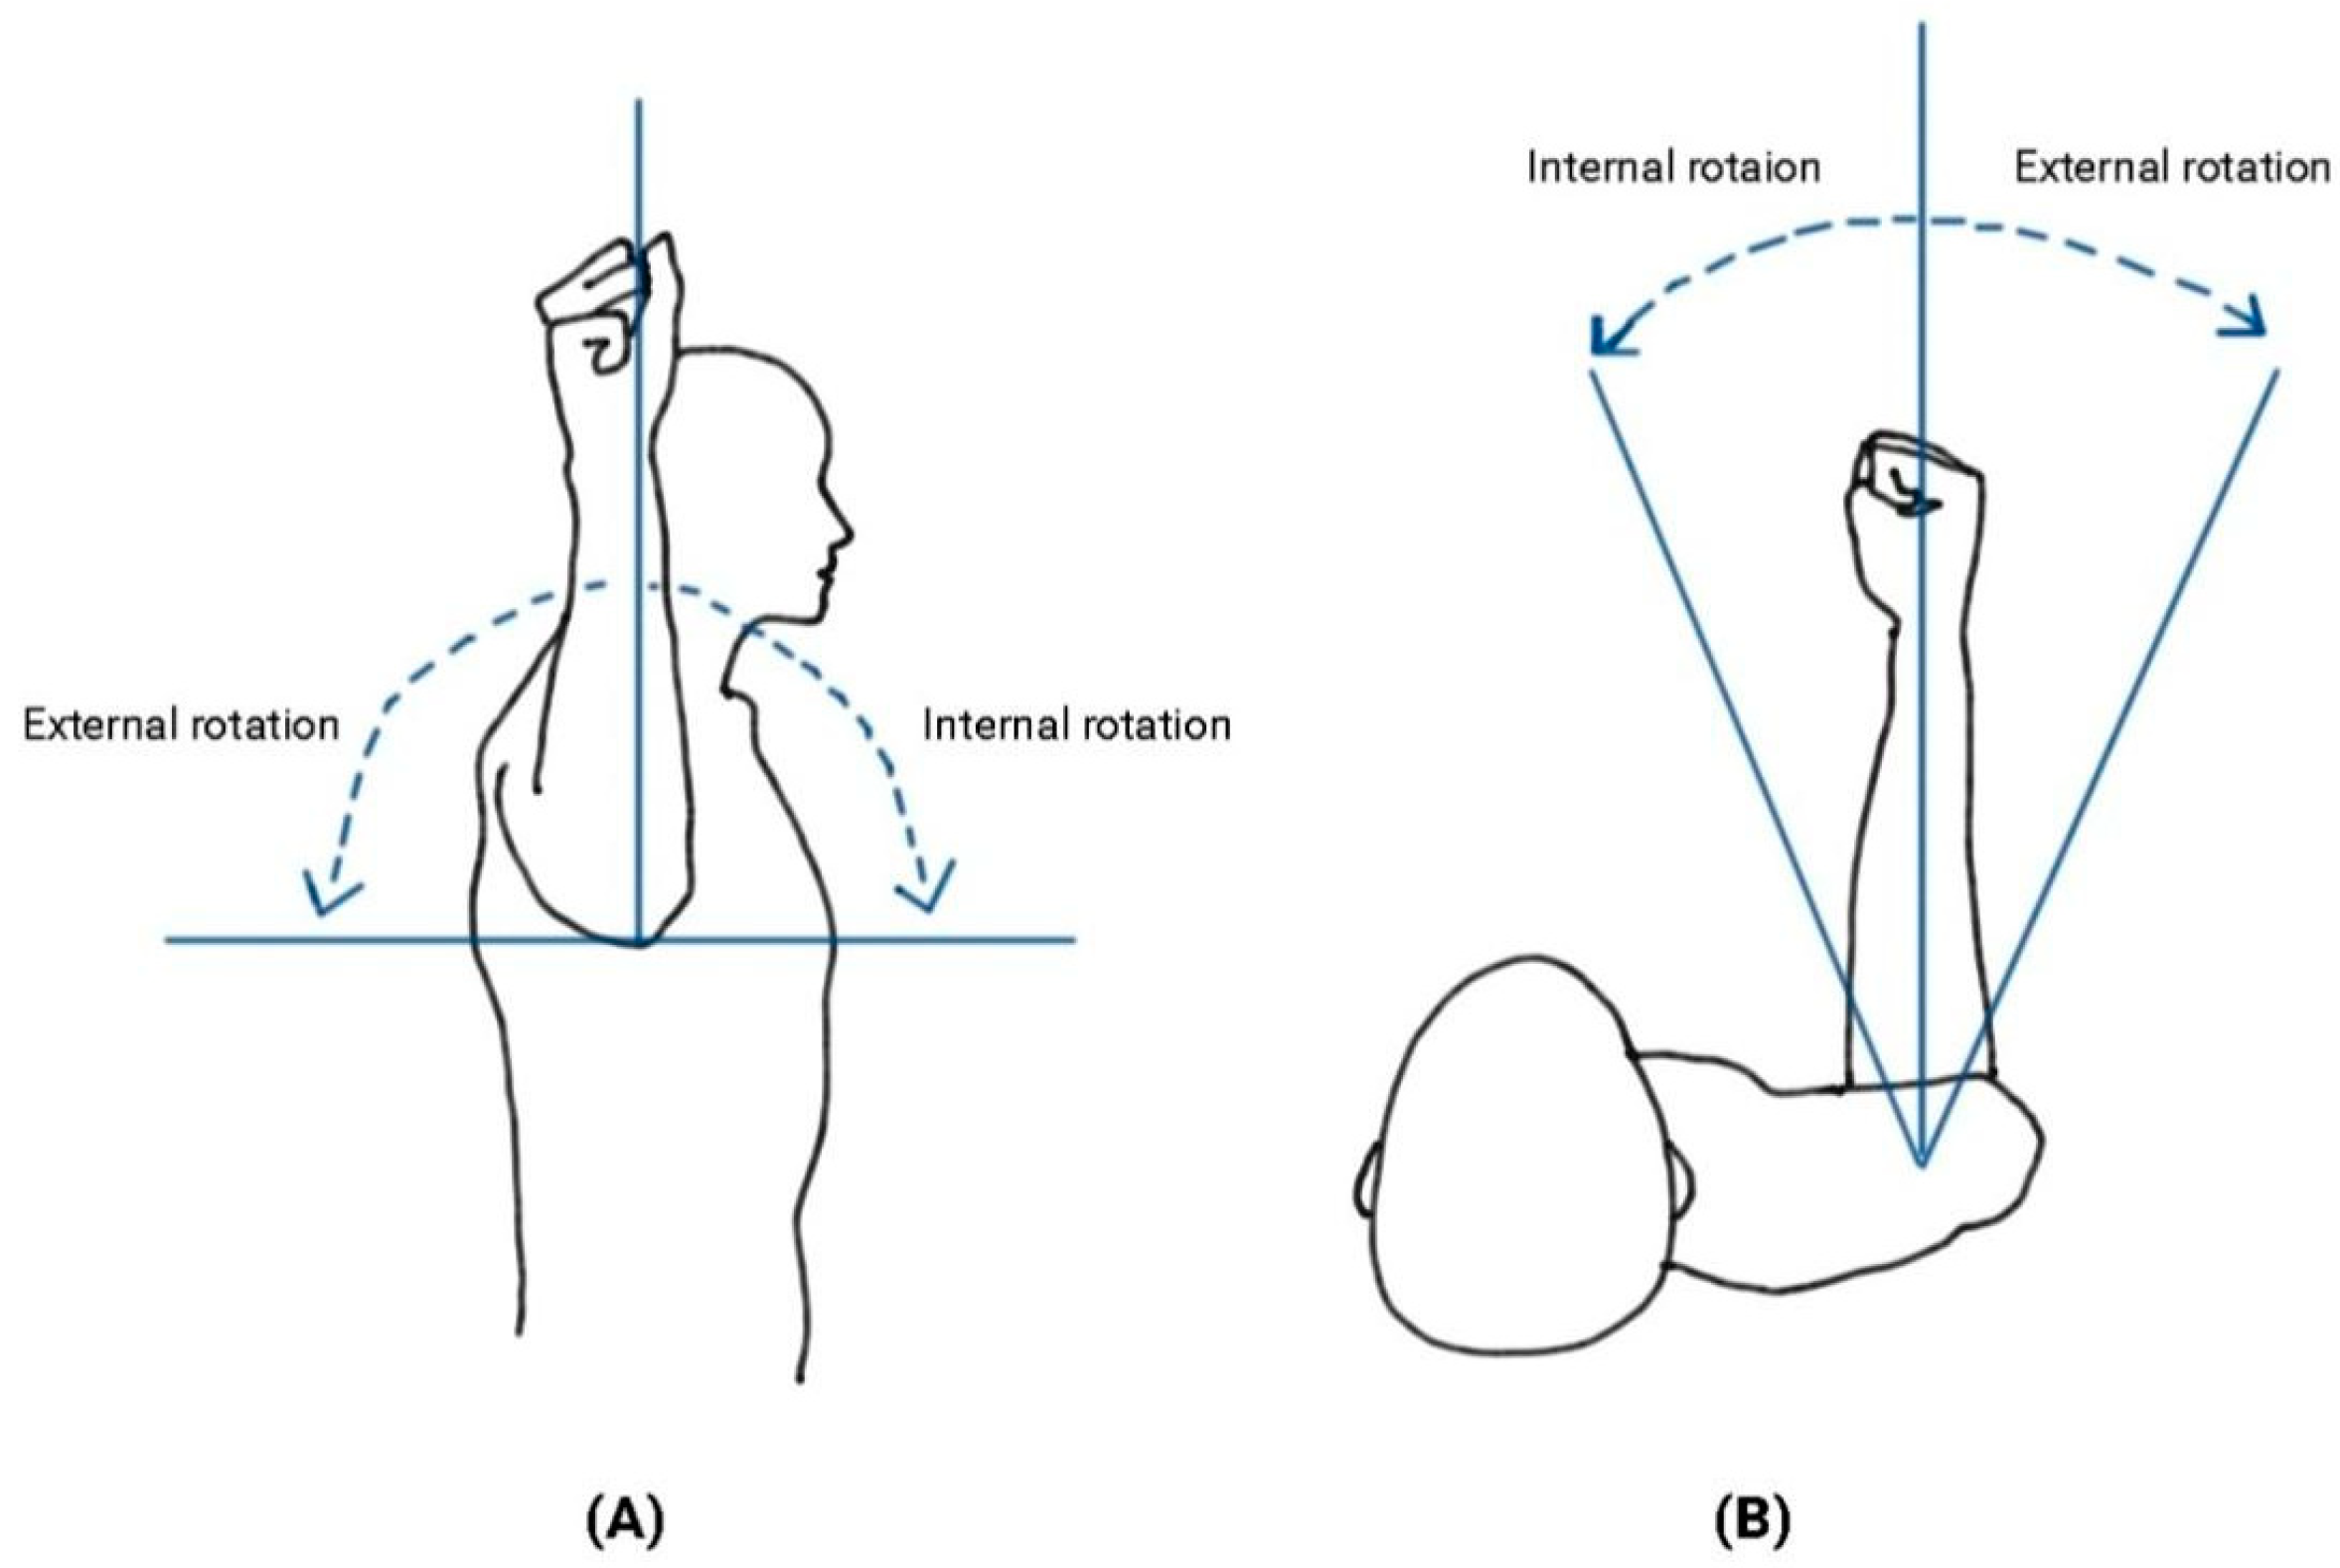 Medial And Lateral Rotation